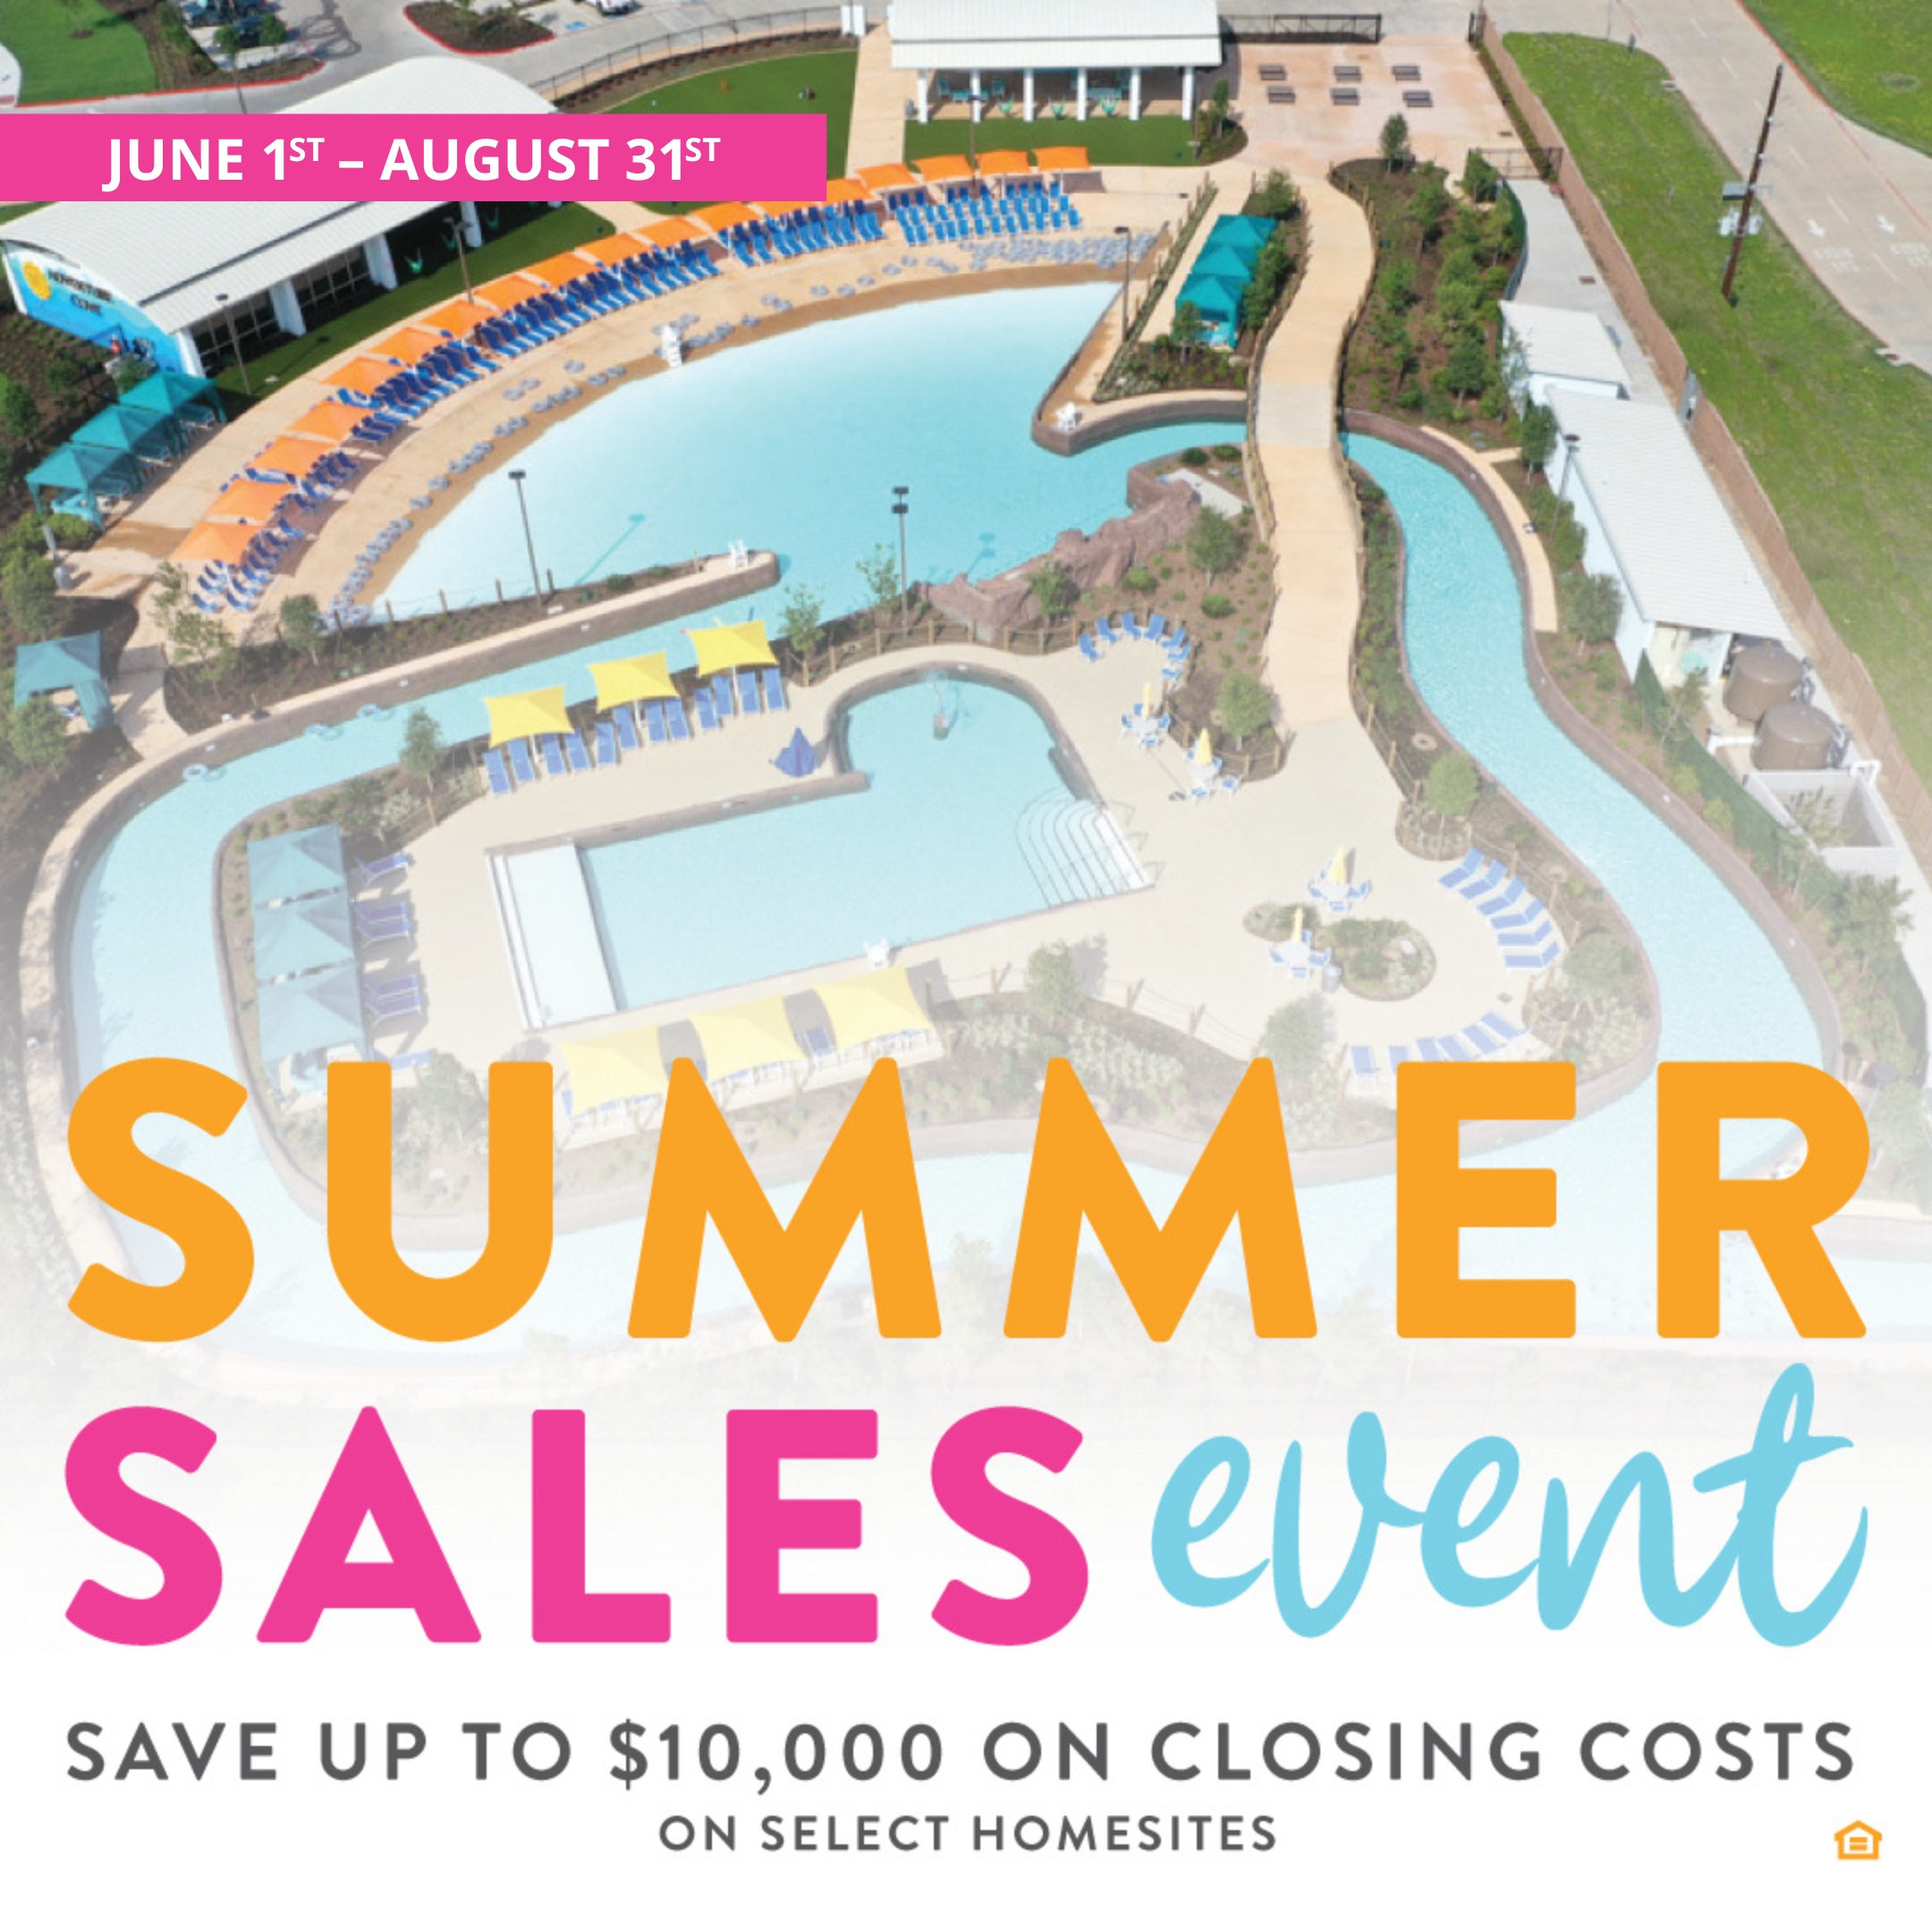 Meridiana’s Summer Savings Event Extended Through August!